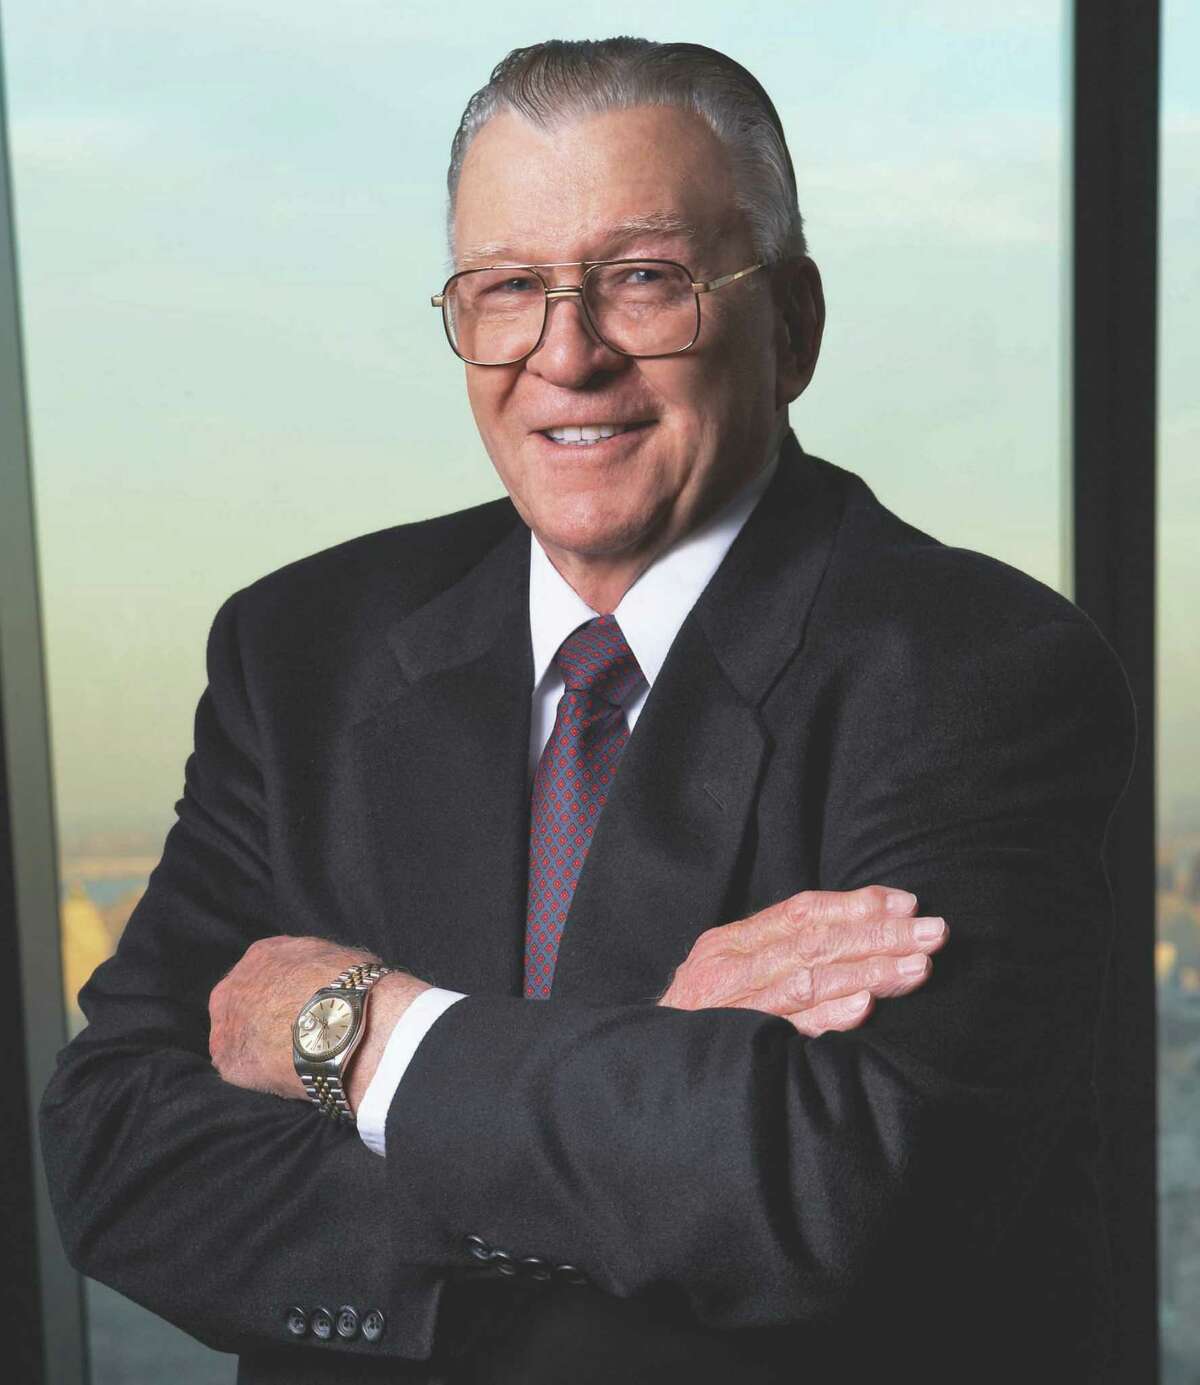 George R. Hearst Jr. had a long career as a newspaper, real estate and corporate executive.